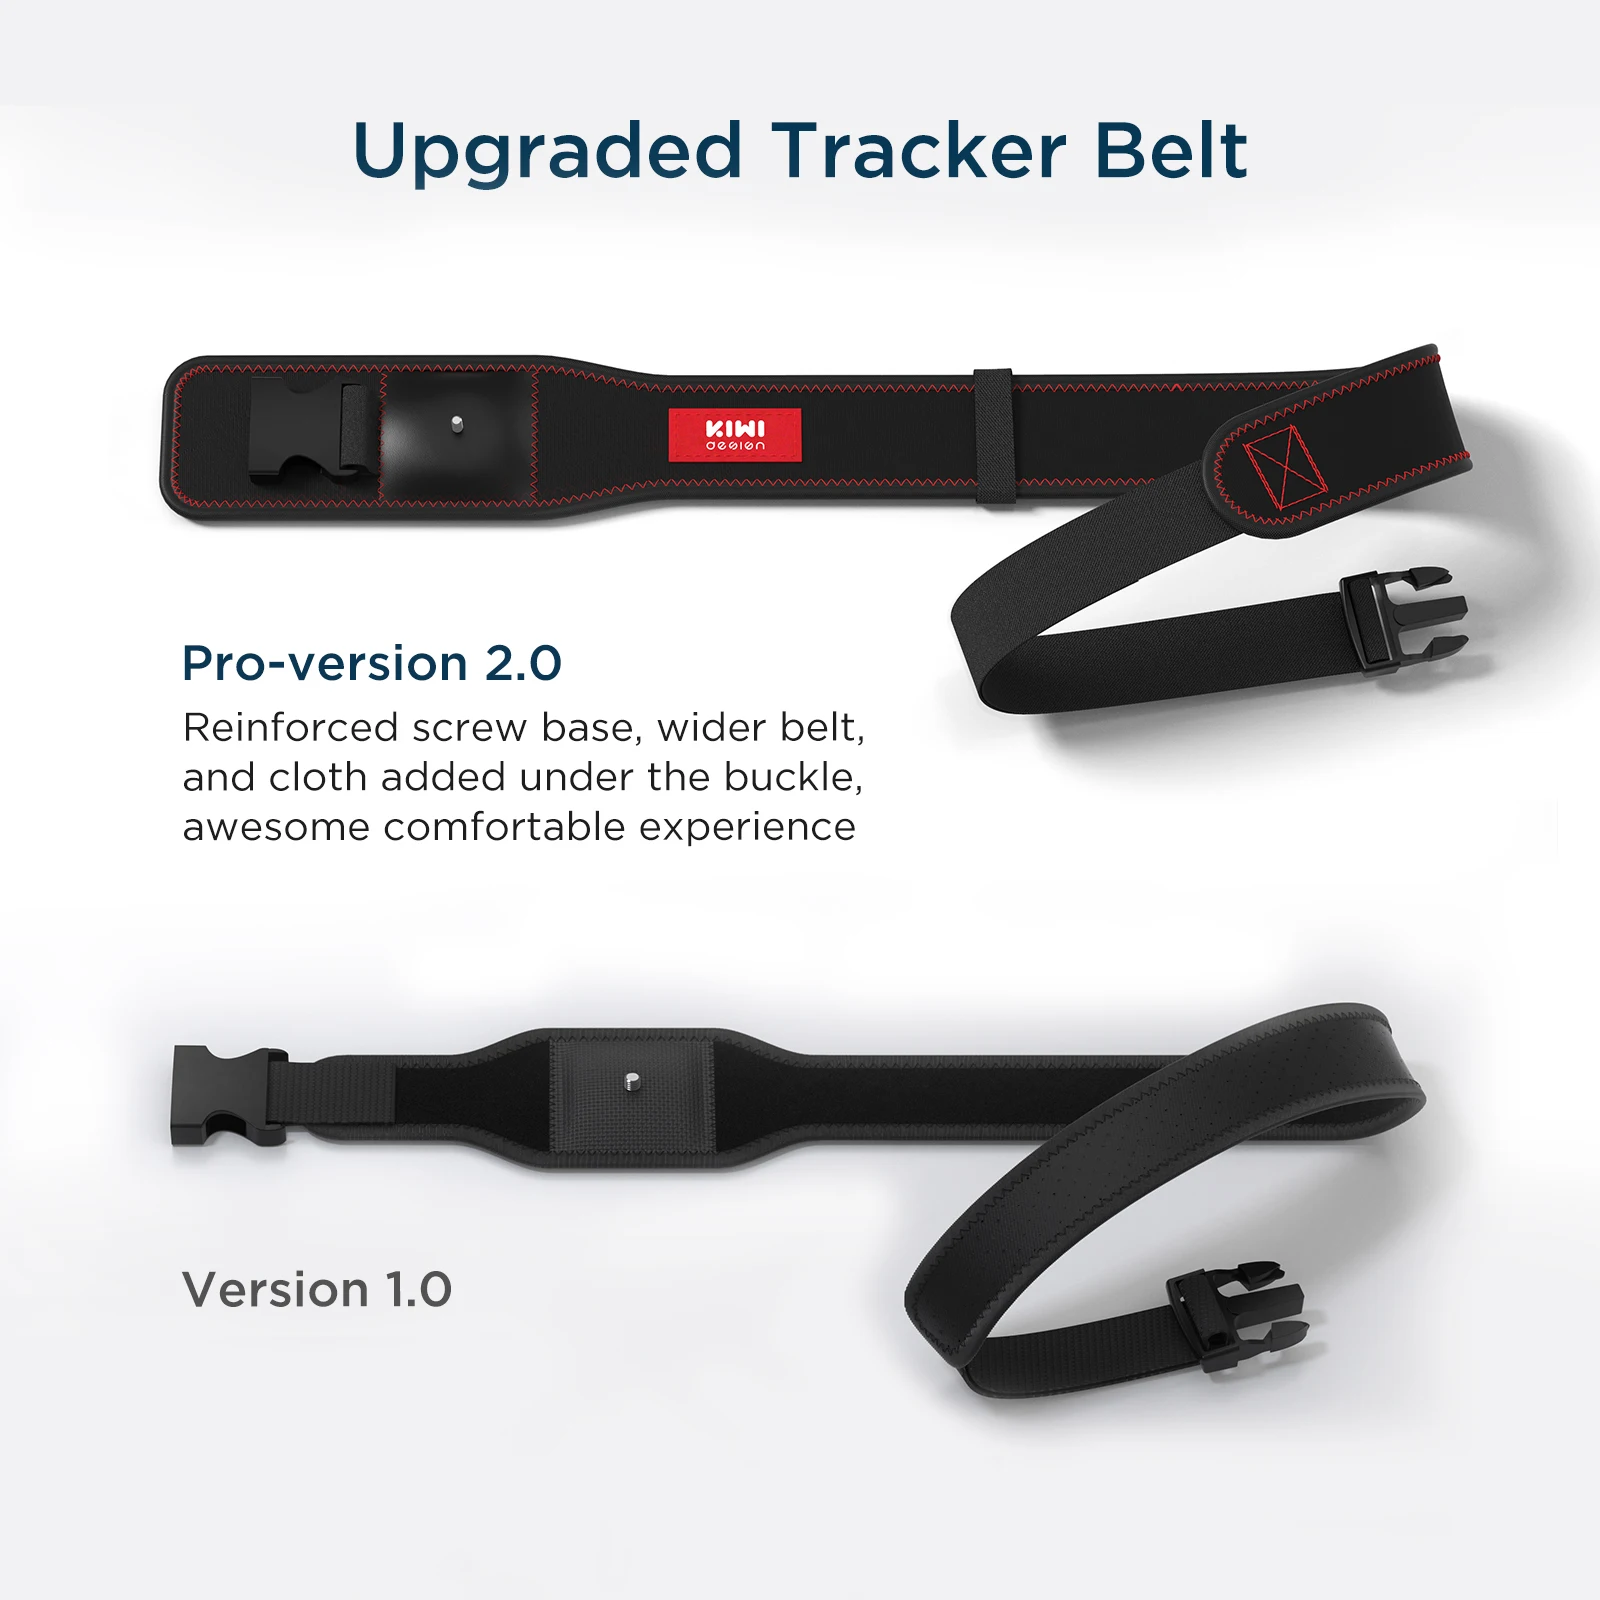 KIWI design Upgraded 5 in 1 Tracker Straps Accessories For HTC Vive System Tracker Adjustable Full Body Tracking Belt and Straps enlarge